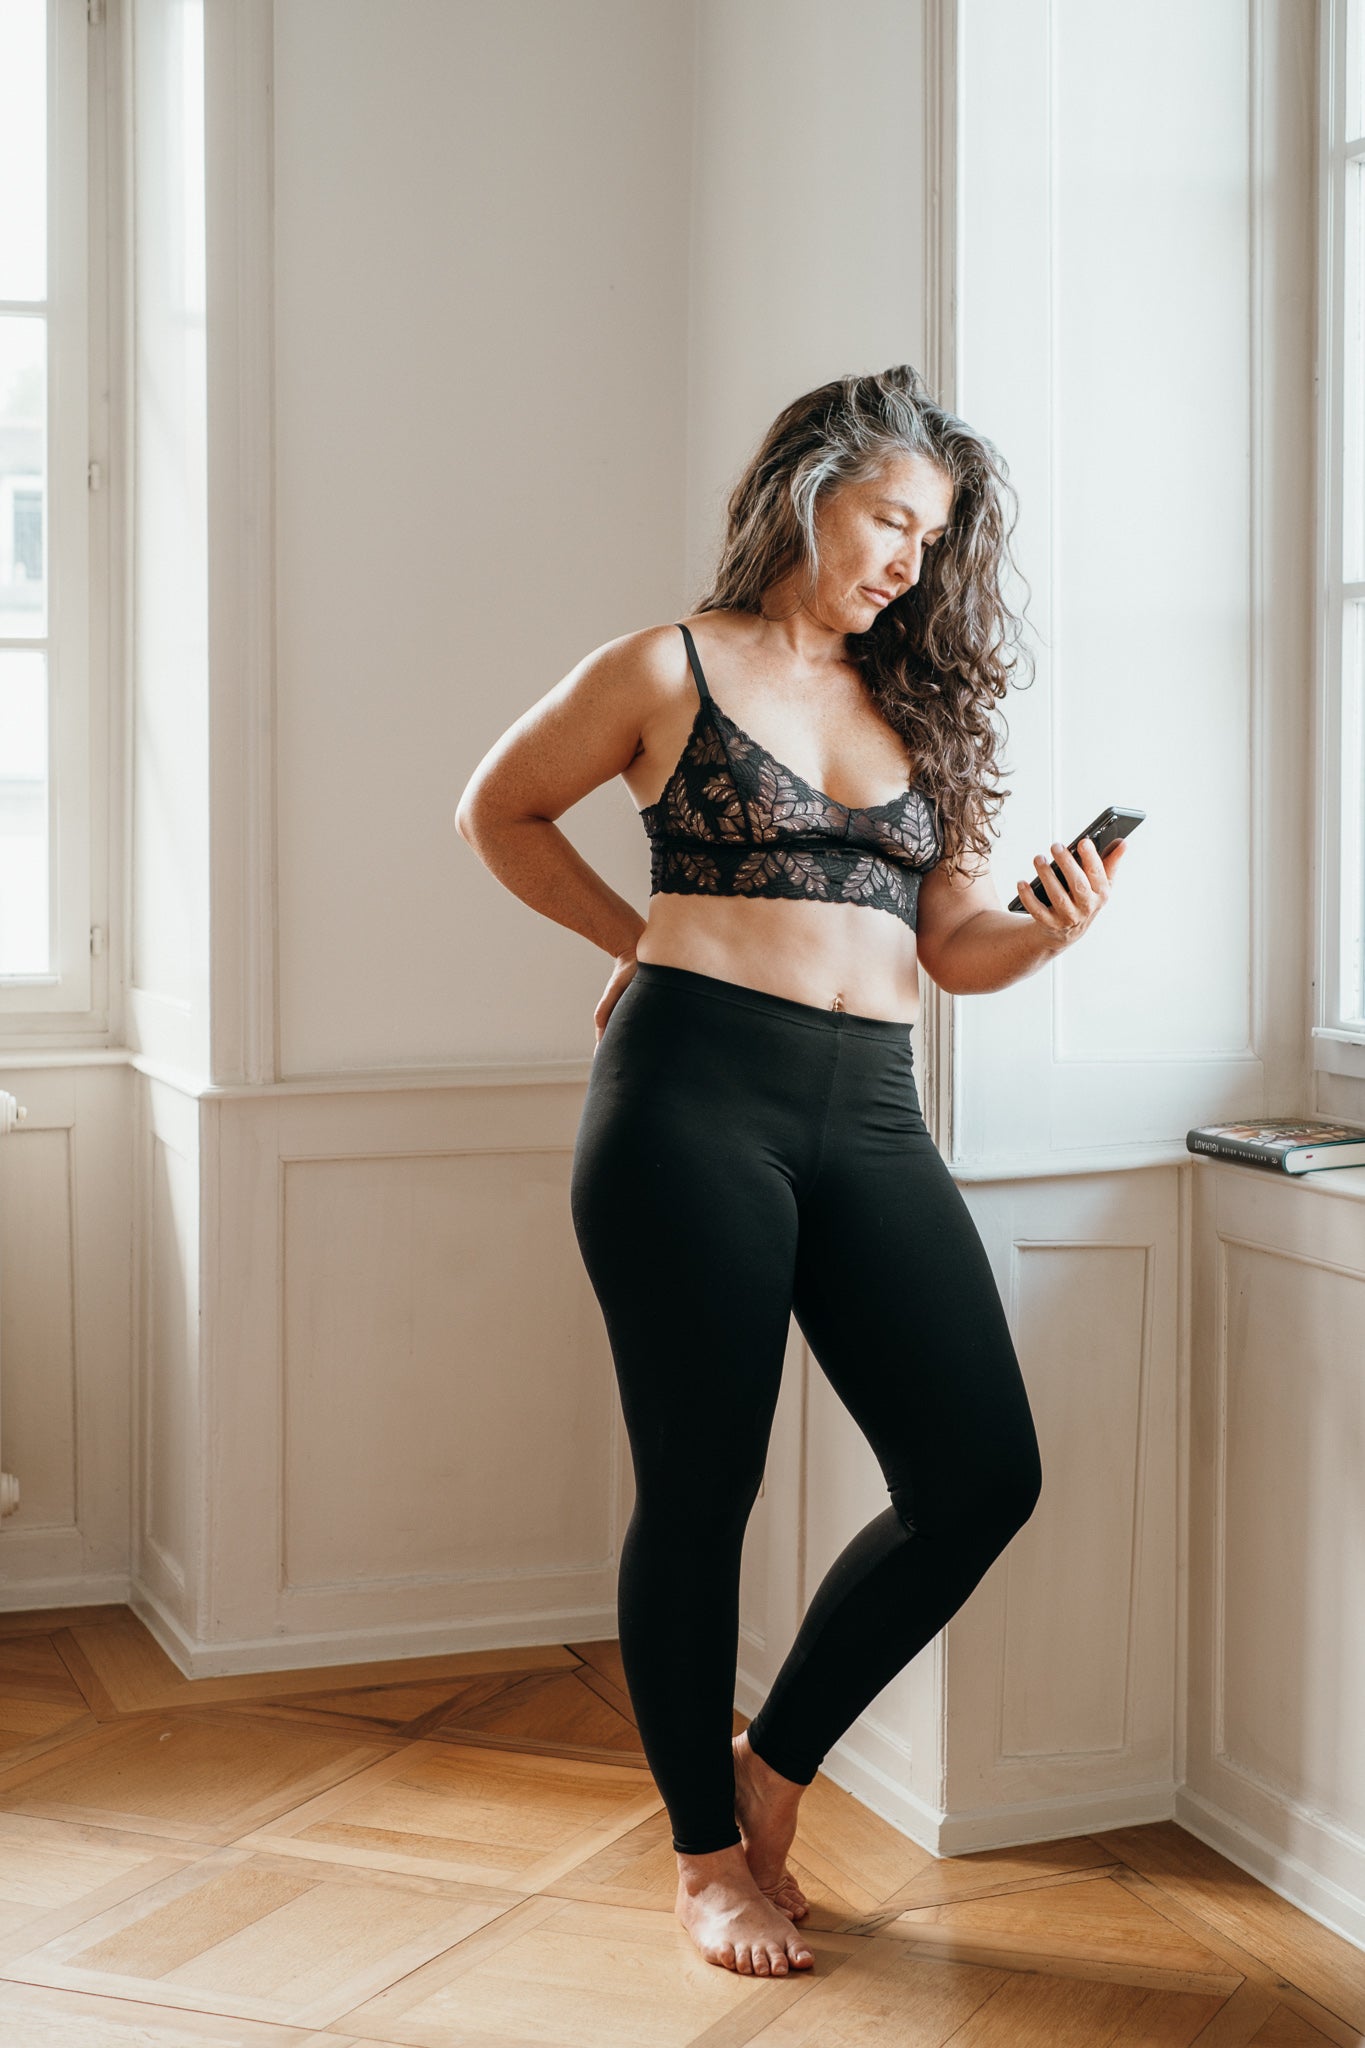 Model leans against wall and looks at her cell phone. She wears leggings and lace bralette.